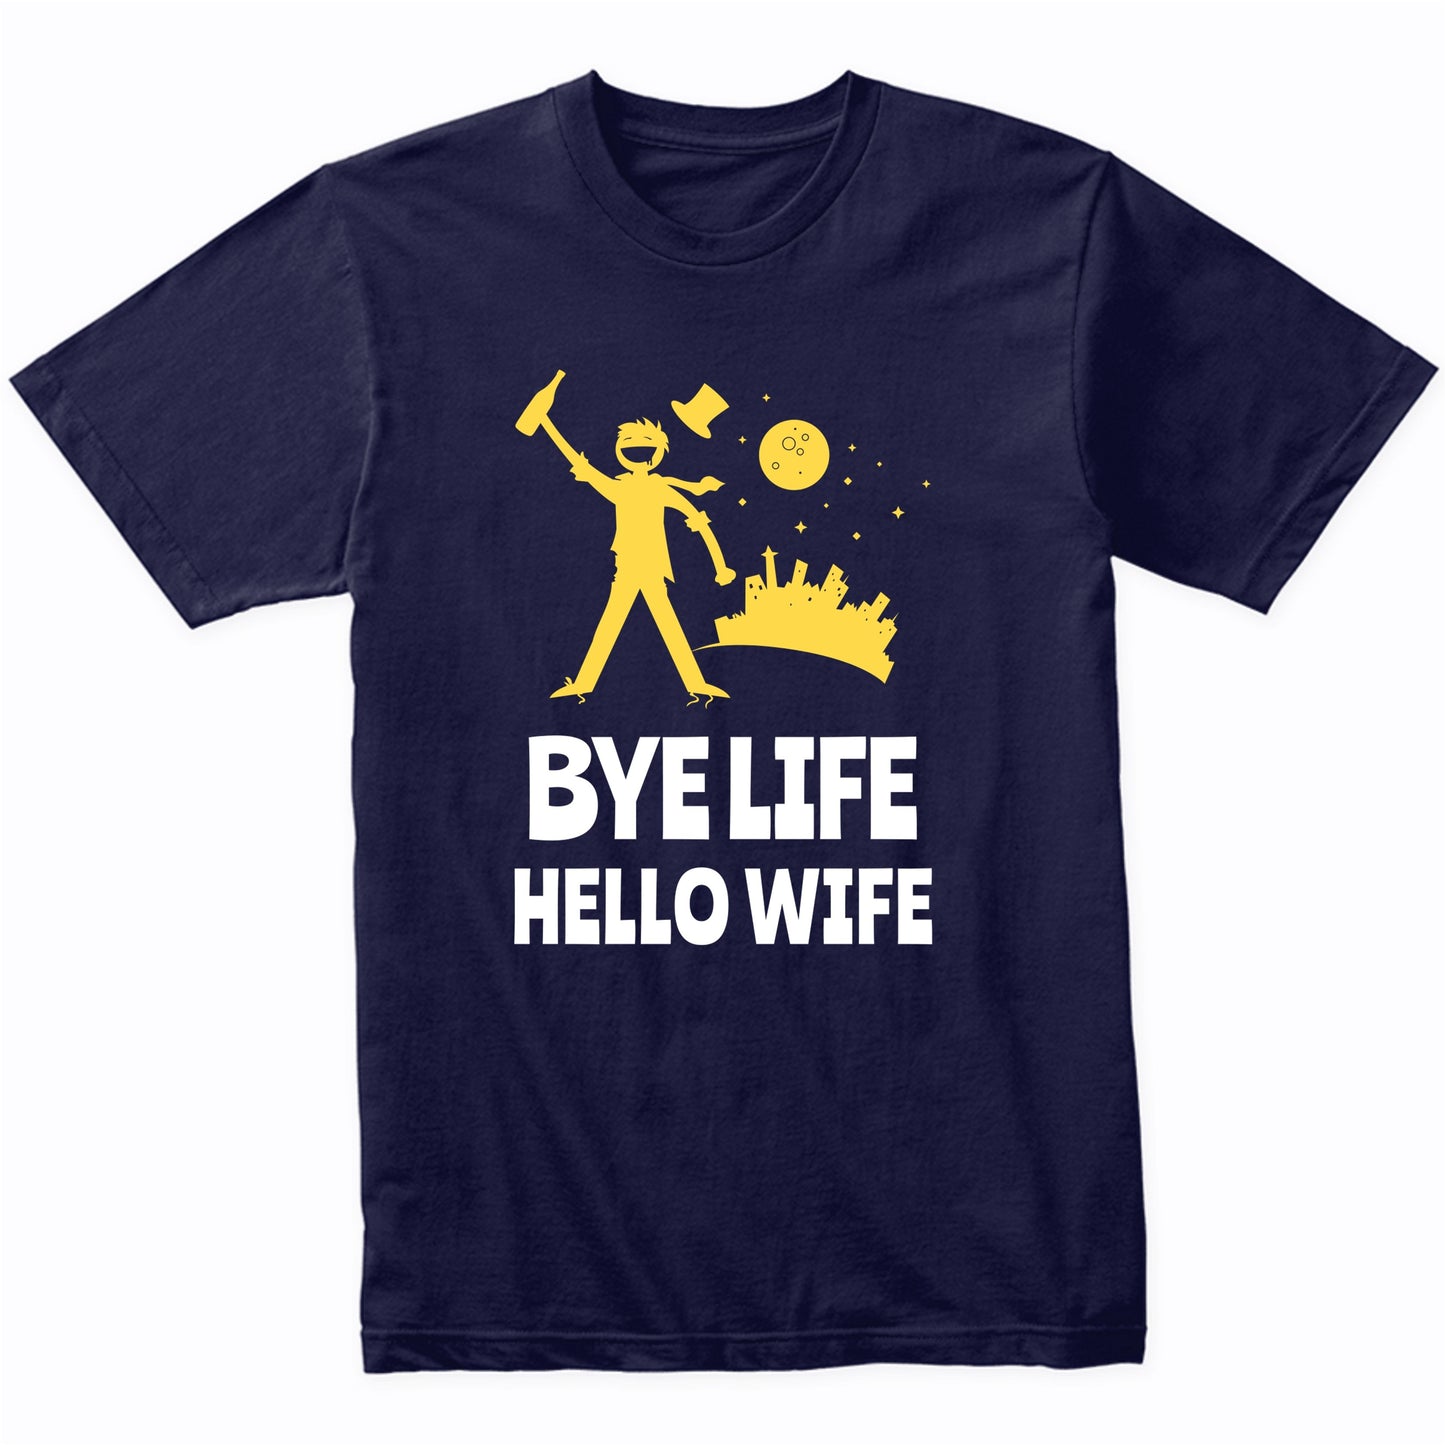 Bachelor Party Drinking Shirt - Bye Life Hello Wife - Funny Bachelor Party Shirt